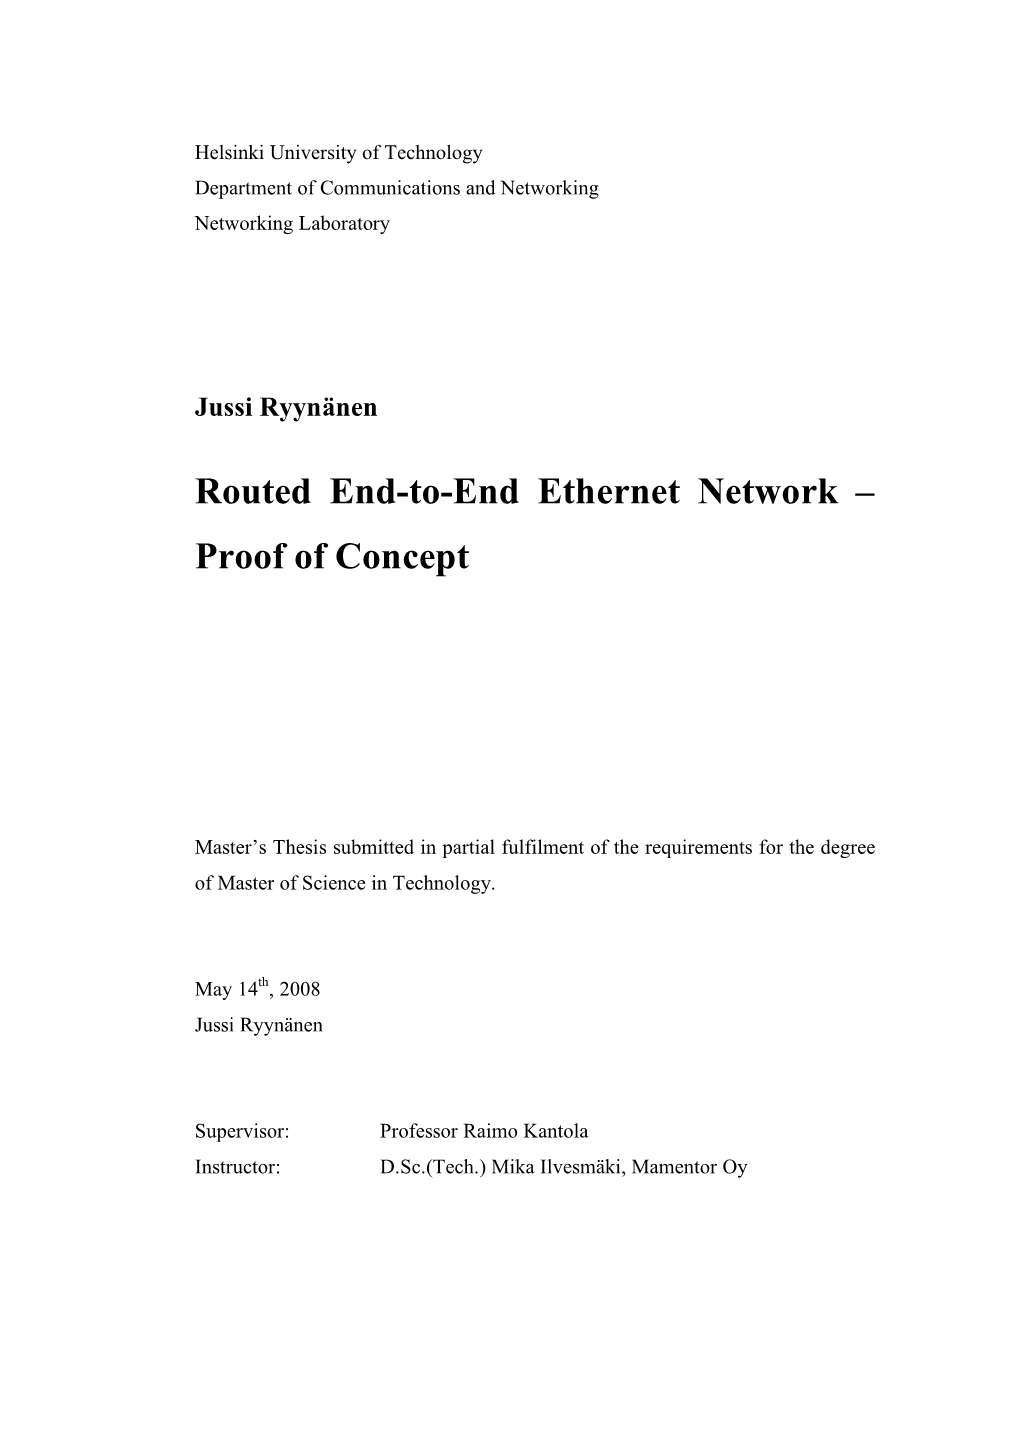 Routed End-To-End Ethernet Network – Proof of Concept